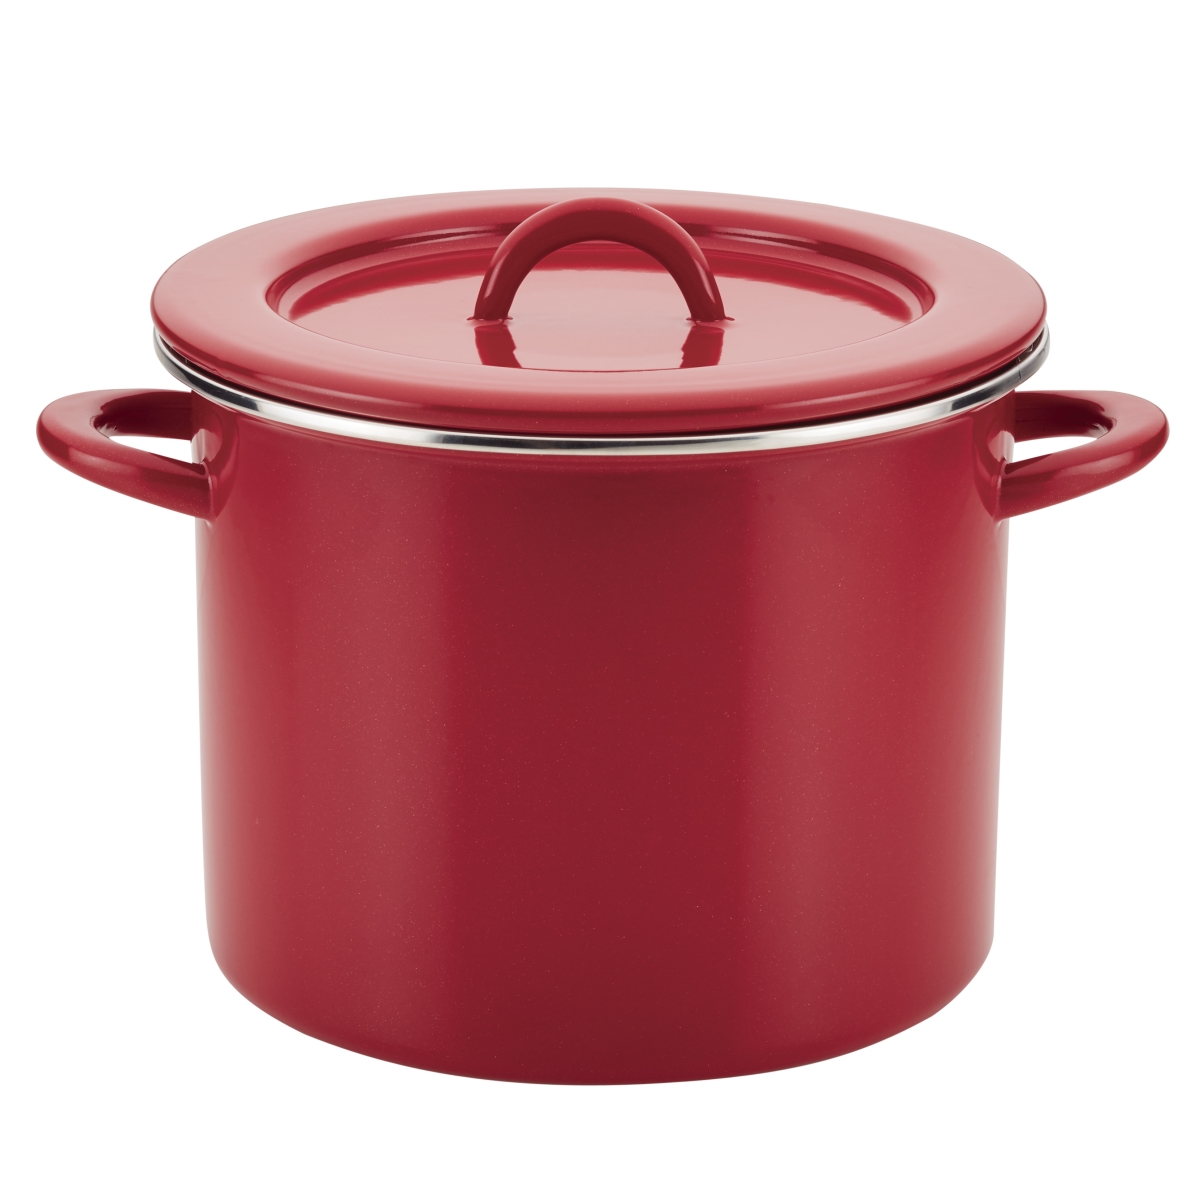 Rachael Ray 47626 12 qt. Create Delicious Enamel on Steel Stockpot - Red Shimmer